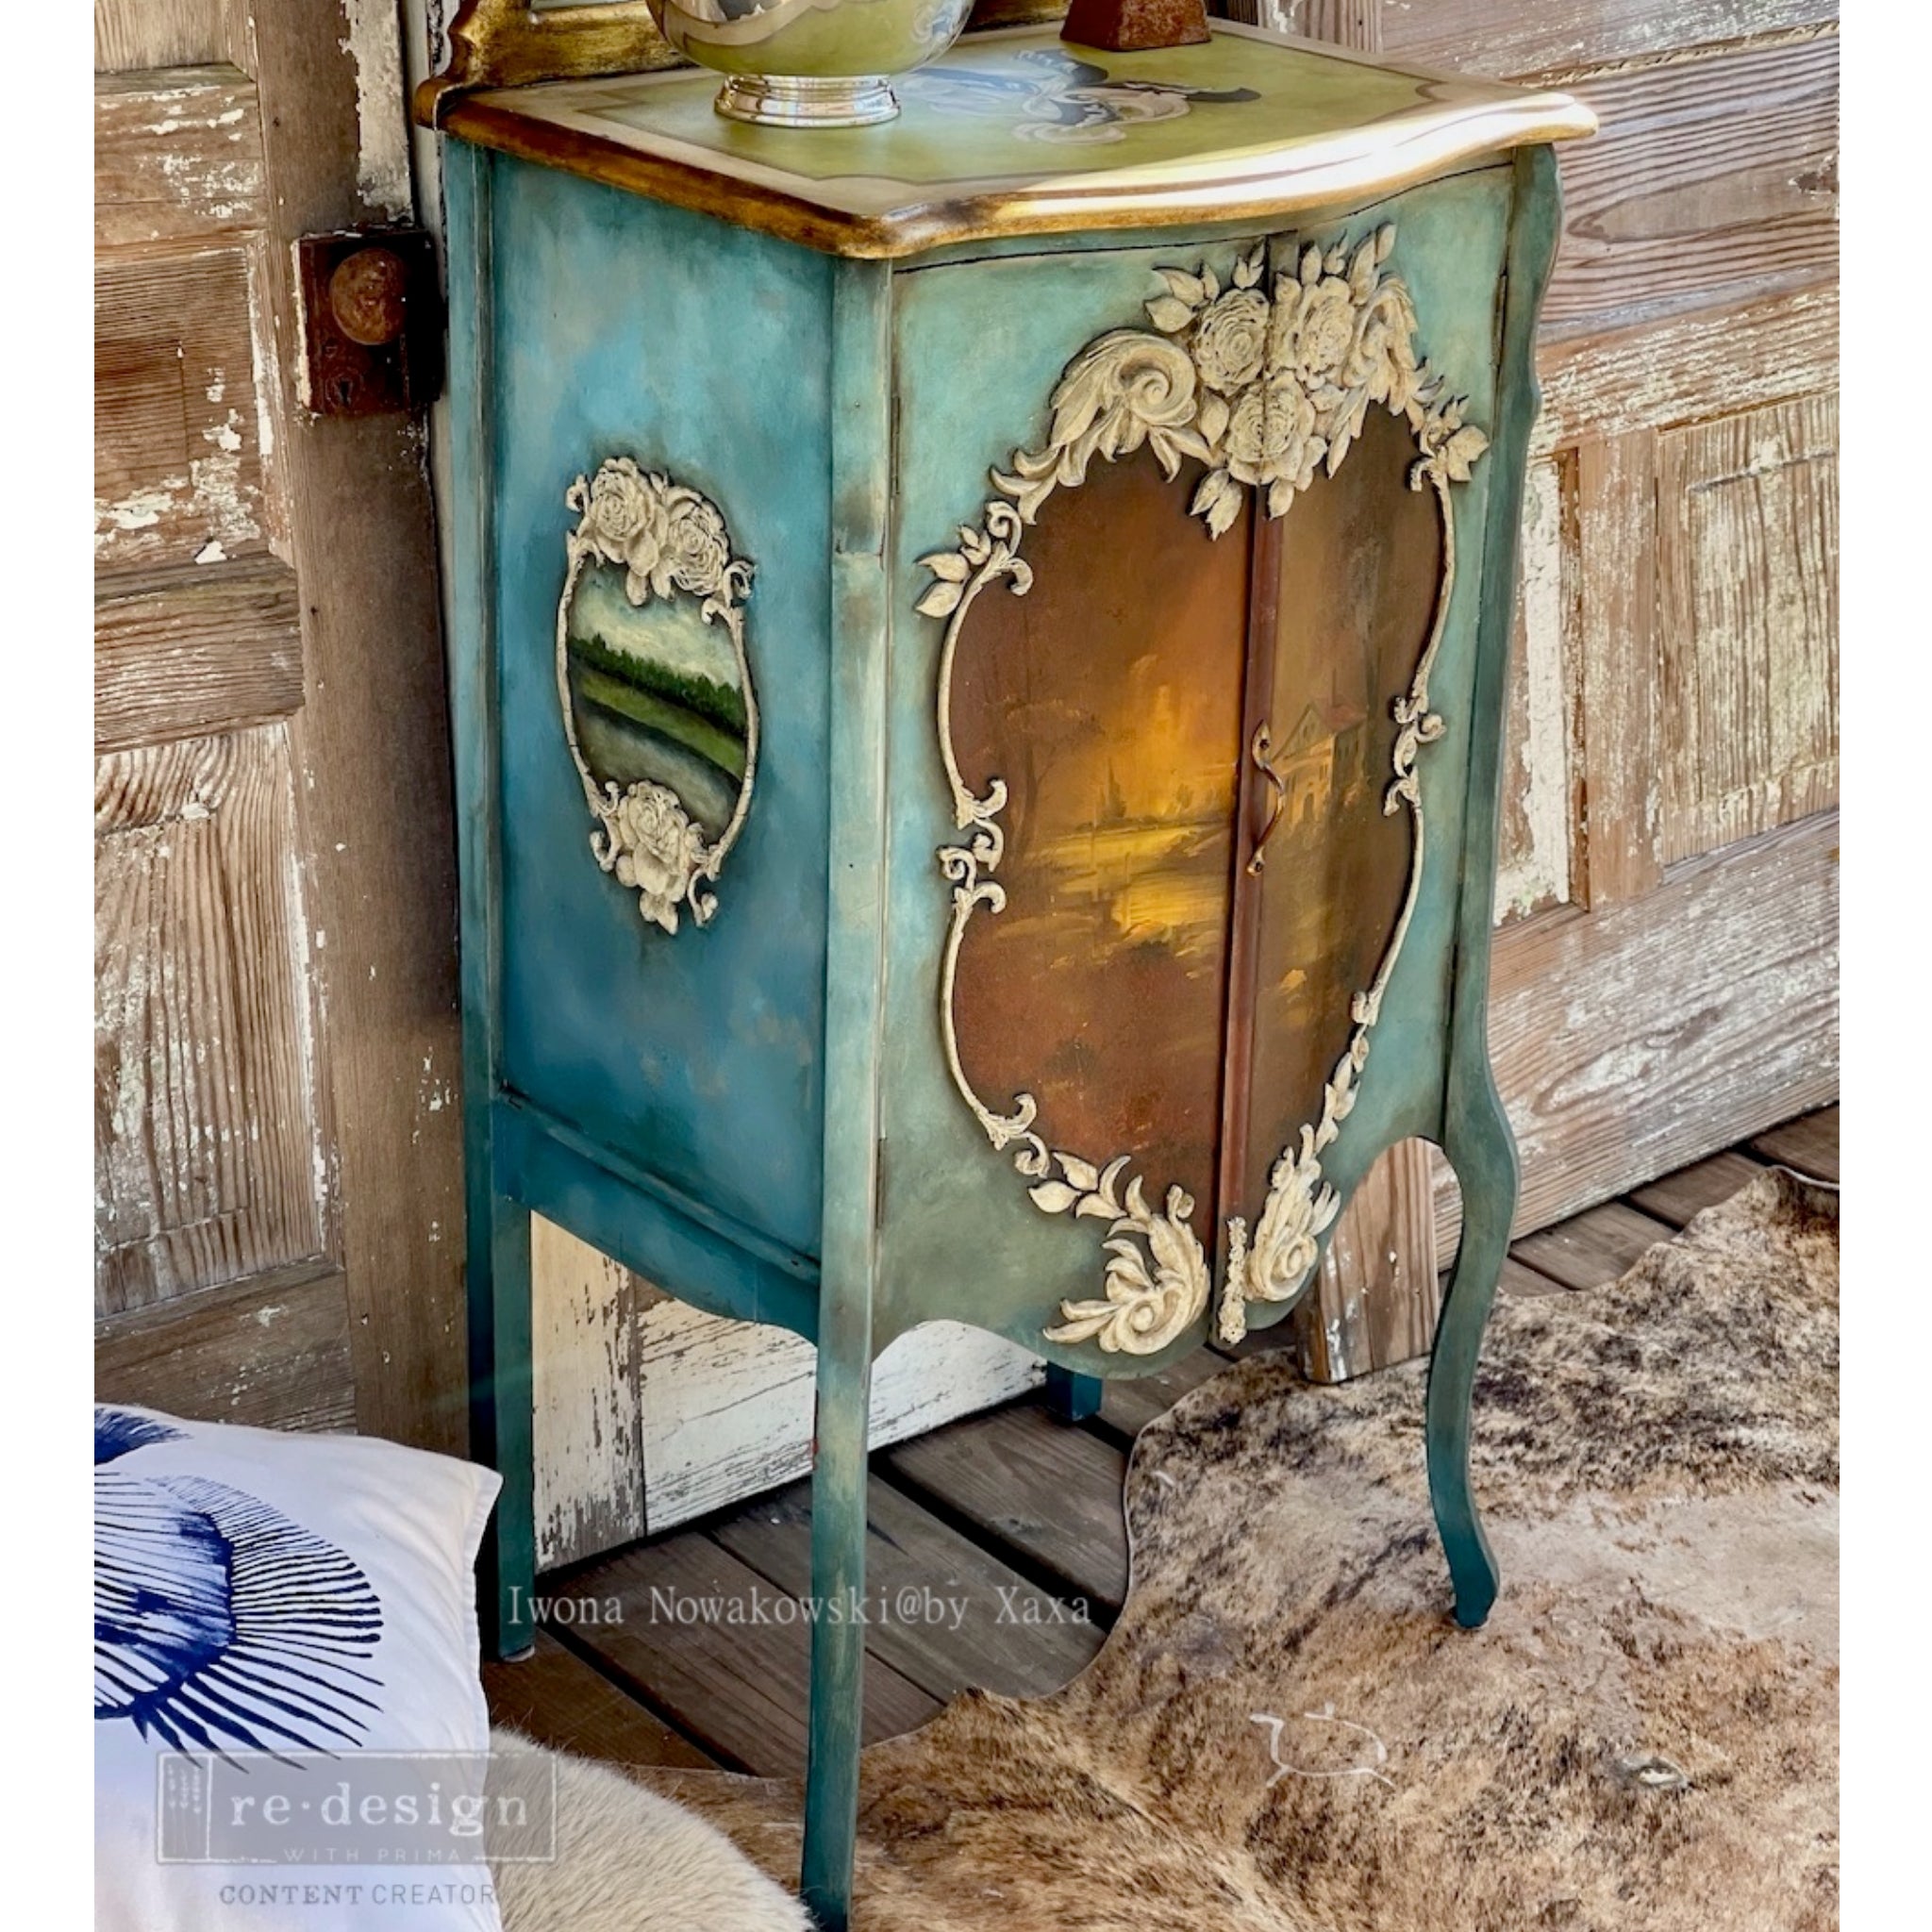 Side view of a vintage small armoire refurbished by Iwona Nowakowski @ by Xaxa is painted teal-blue and features ReDesign with Prima's Victorian Rose silicone mould around an antique brown decoupage paper design.